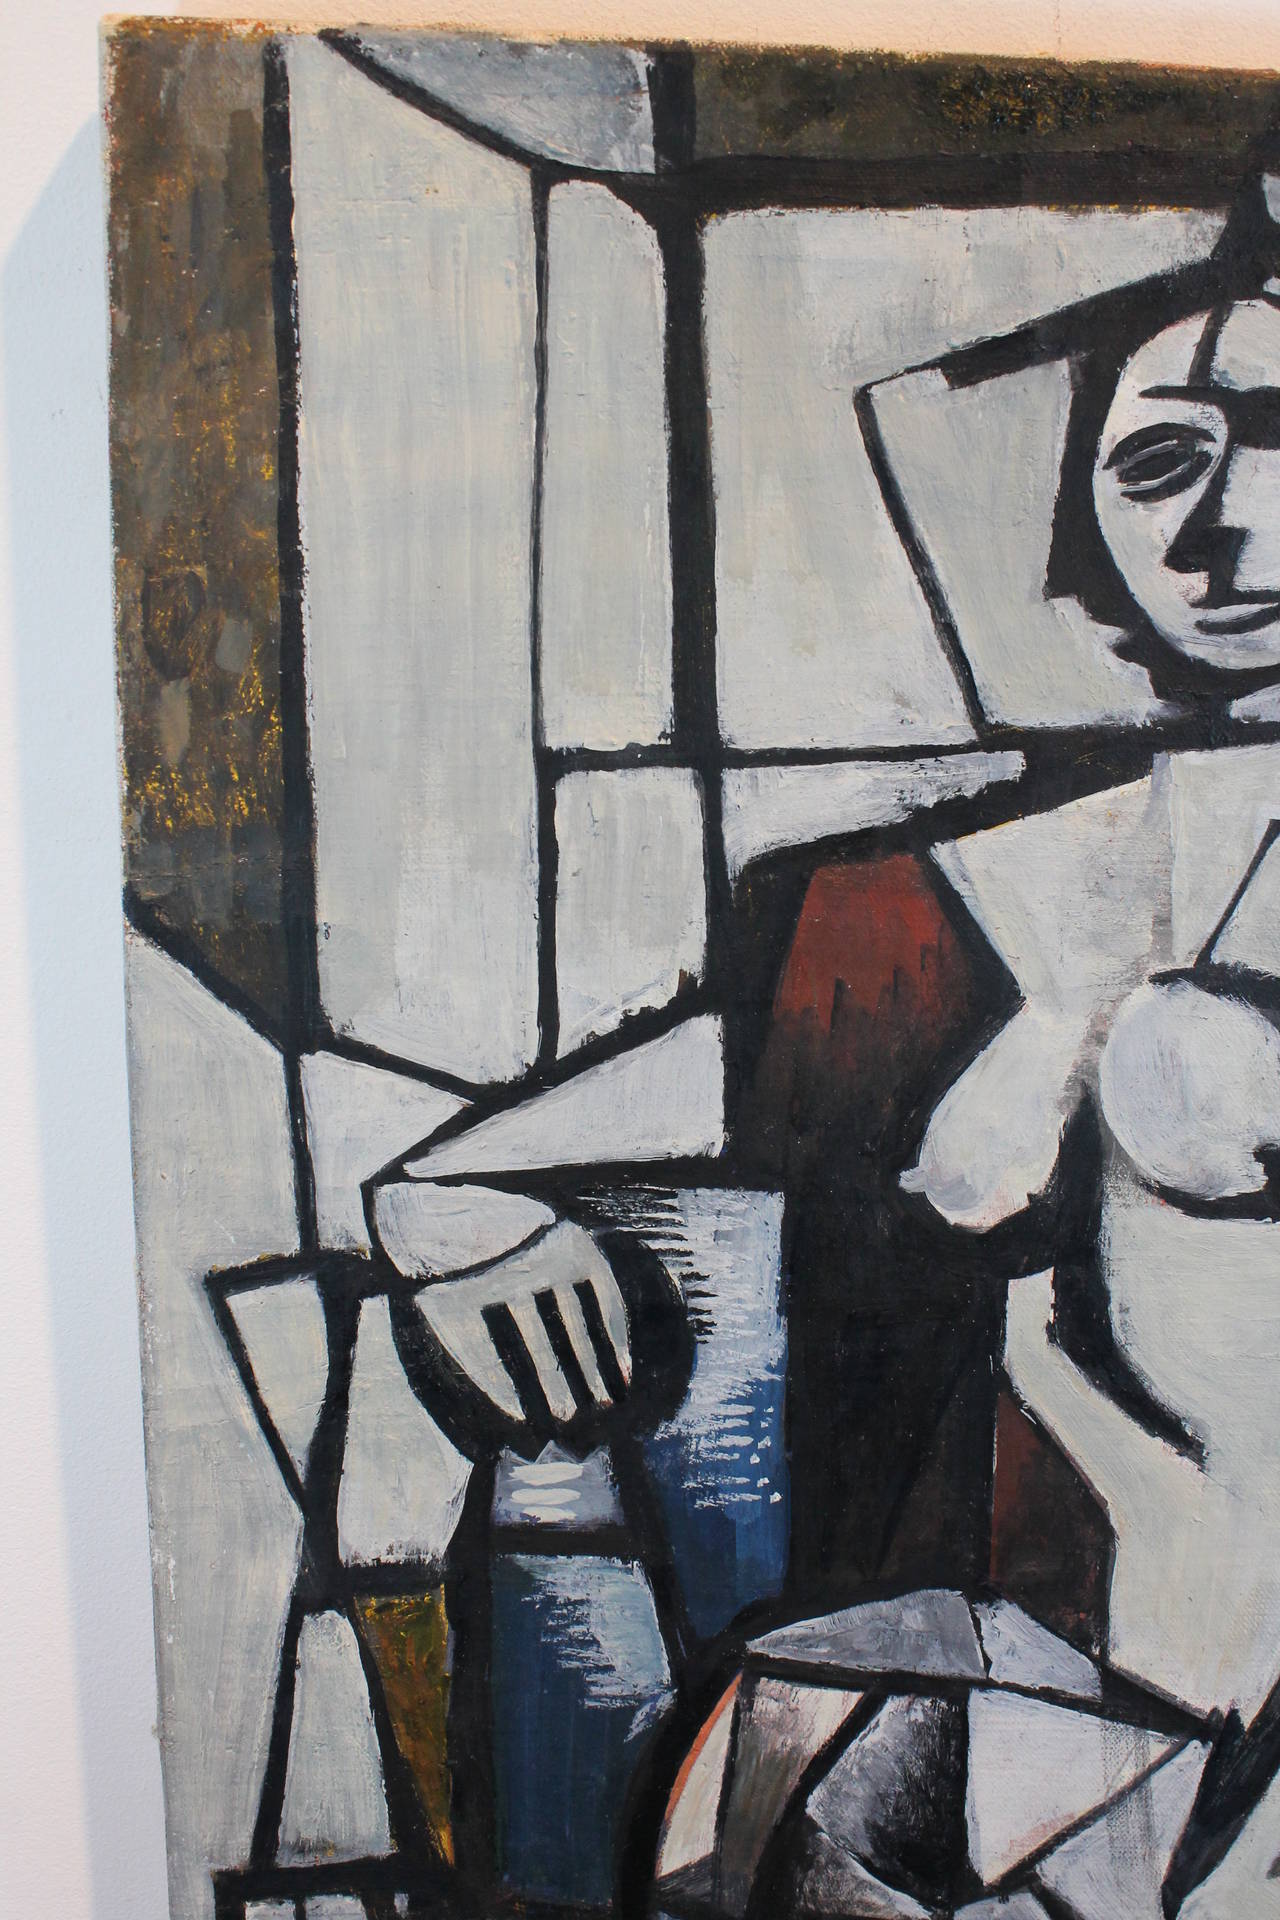 Powerful cubist figurative oil on canvas.
Wonderful muted pallette.
The painting is stretched on canvas and is unframed and unsigned.